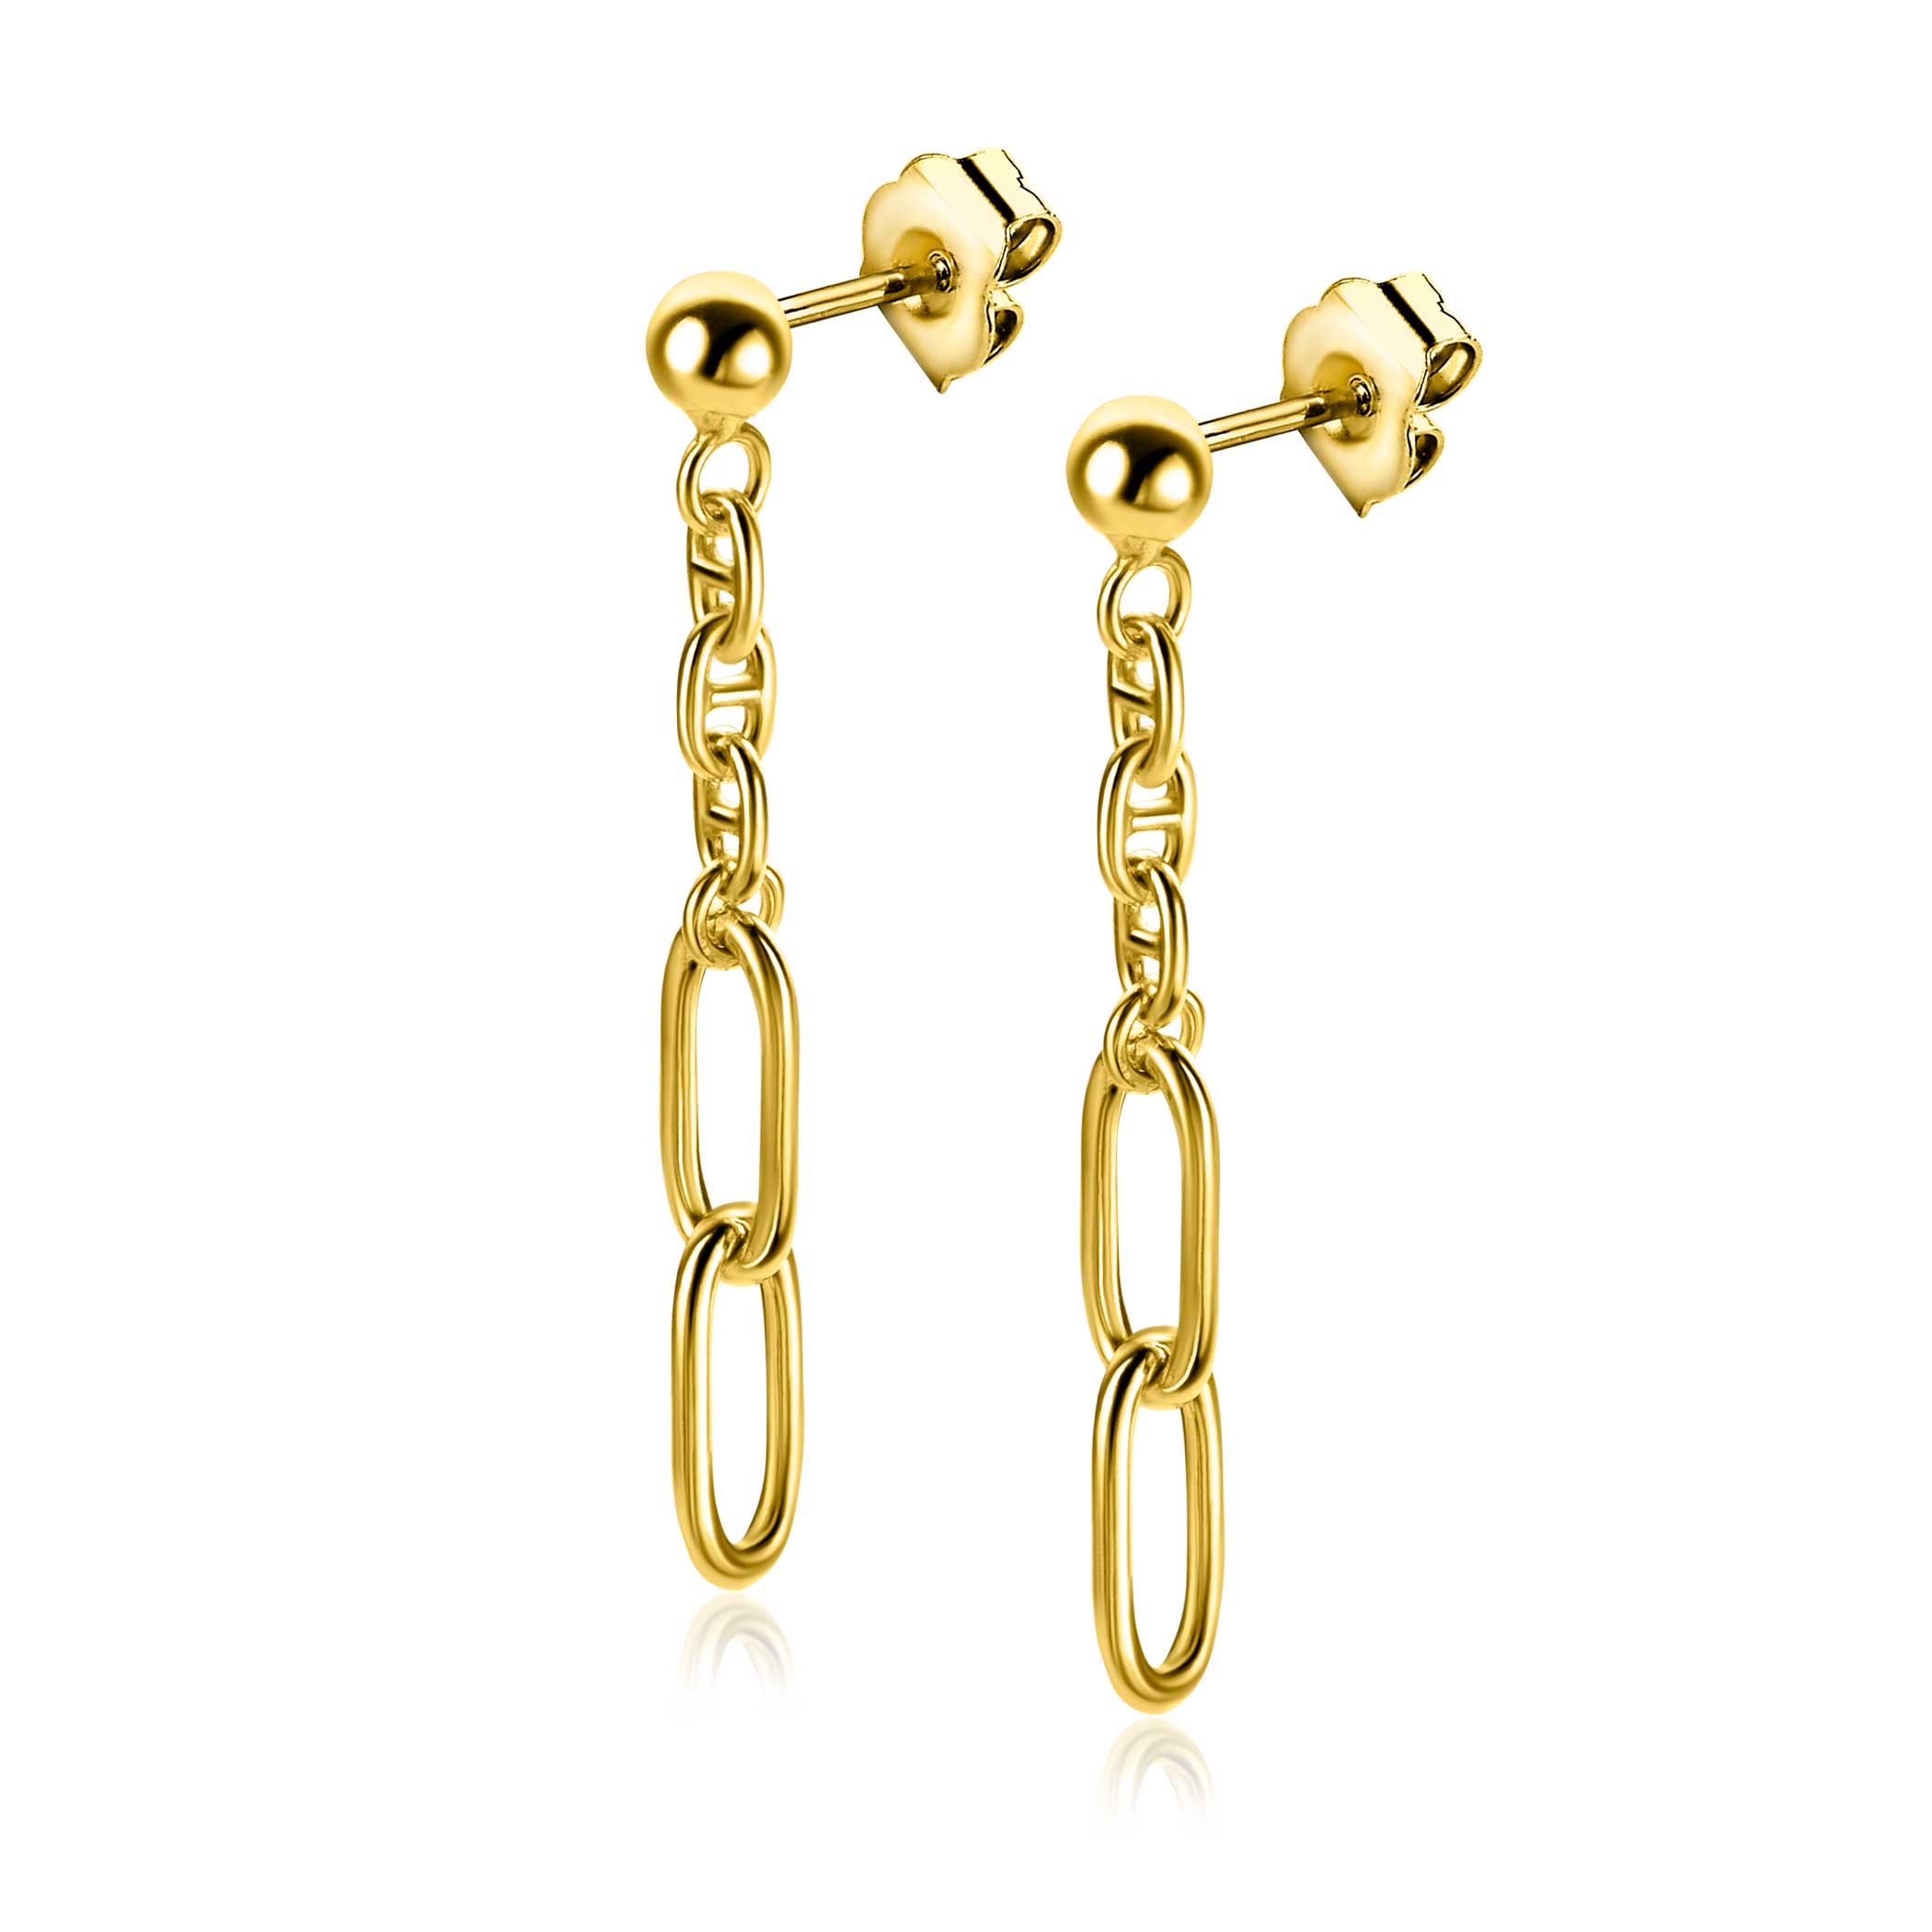 35mm ZINZI Gold Plated Sterling Silver Stud Earrings with Marine Chain and 2 Oval Chains ZIO2413G